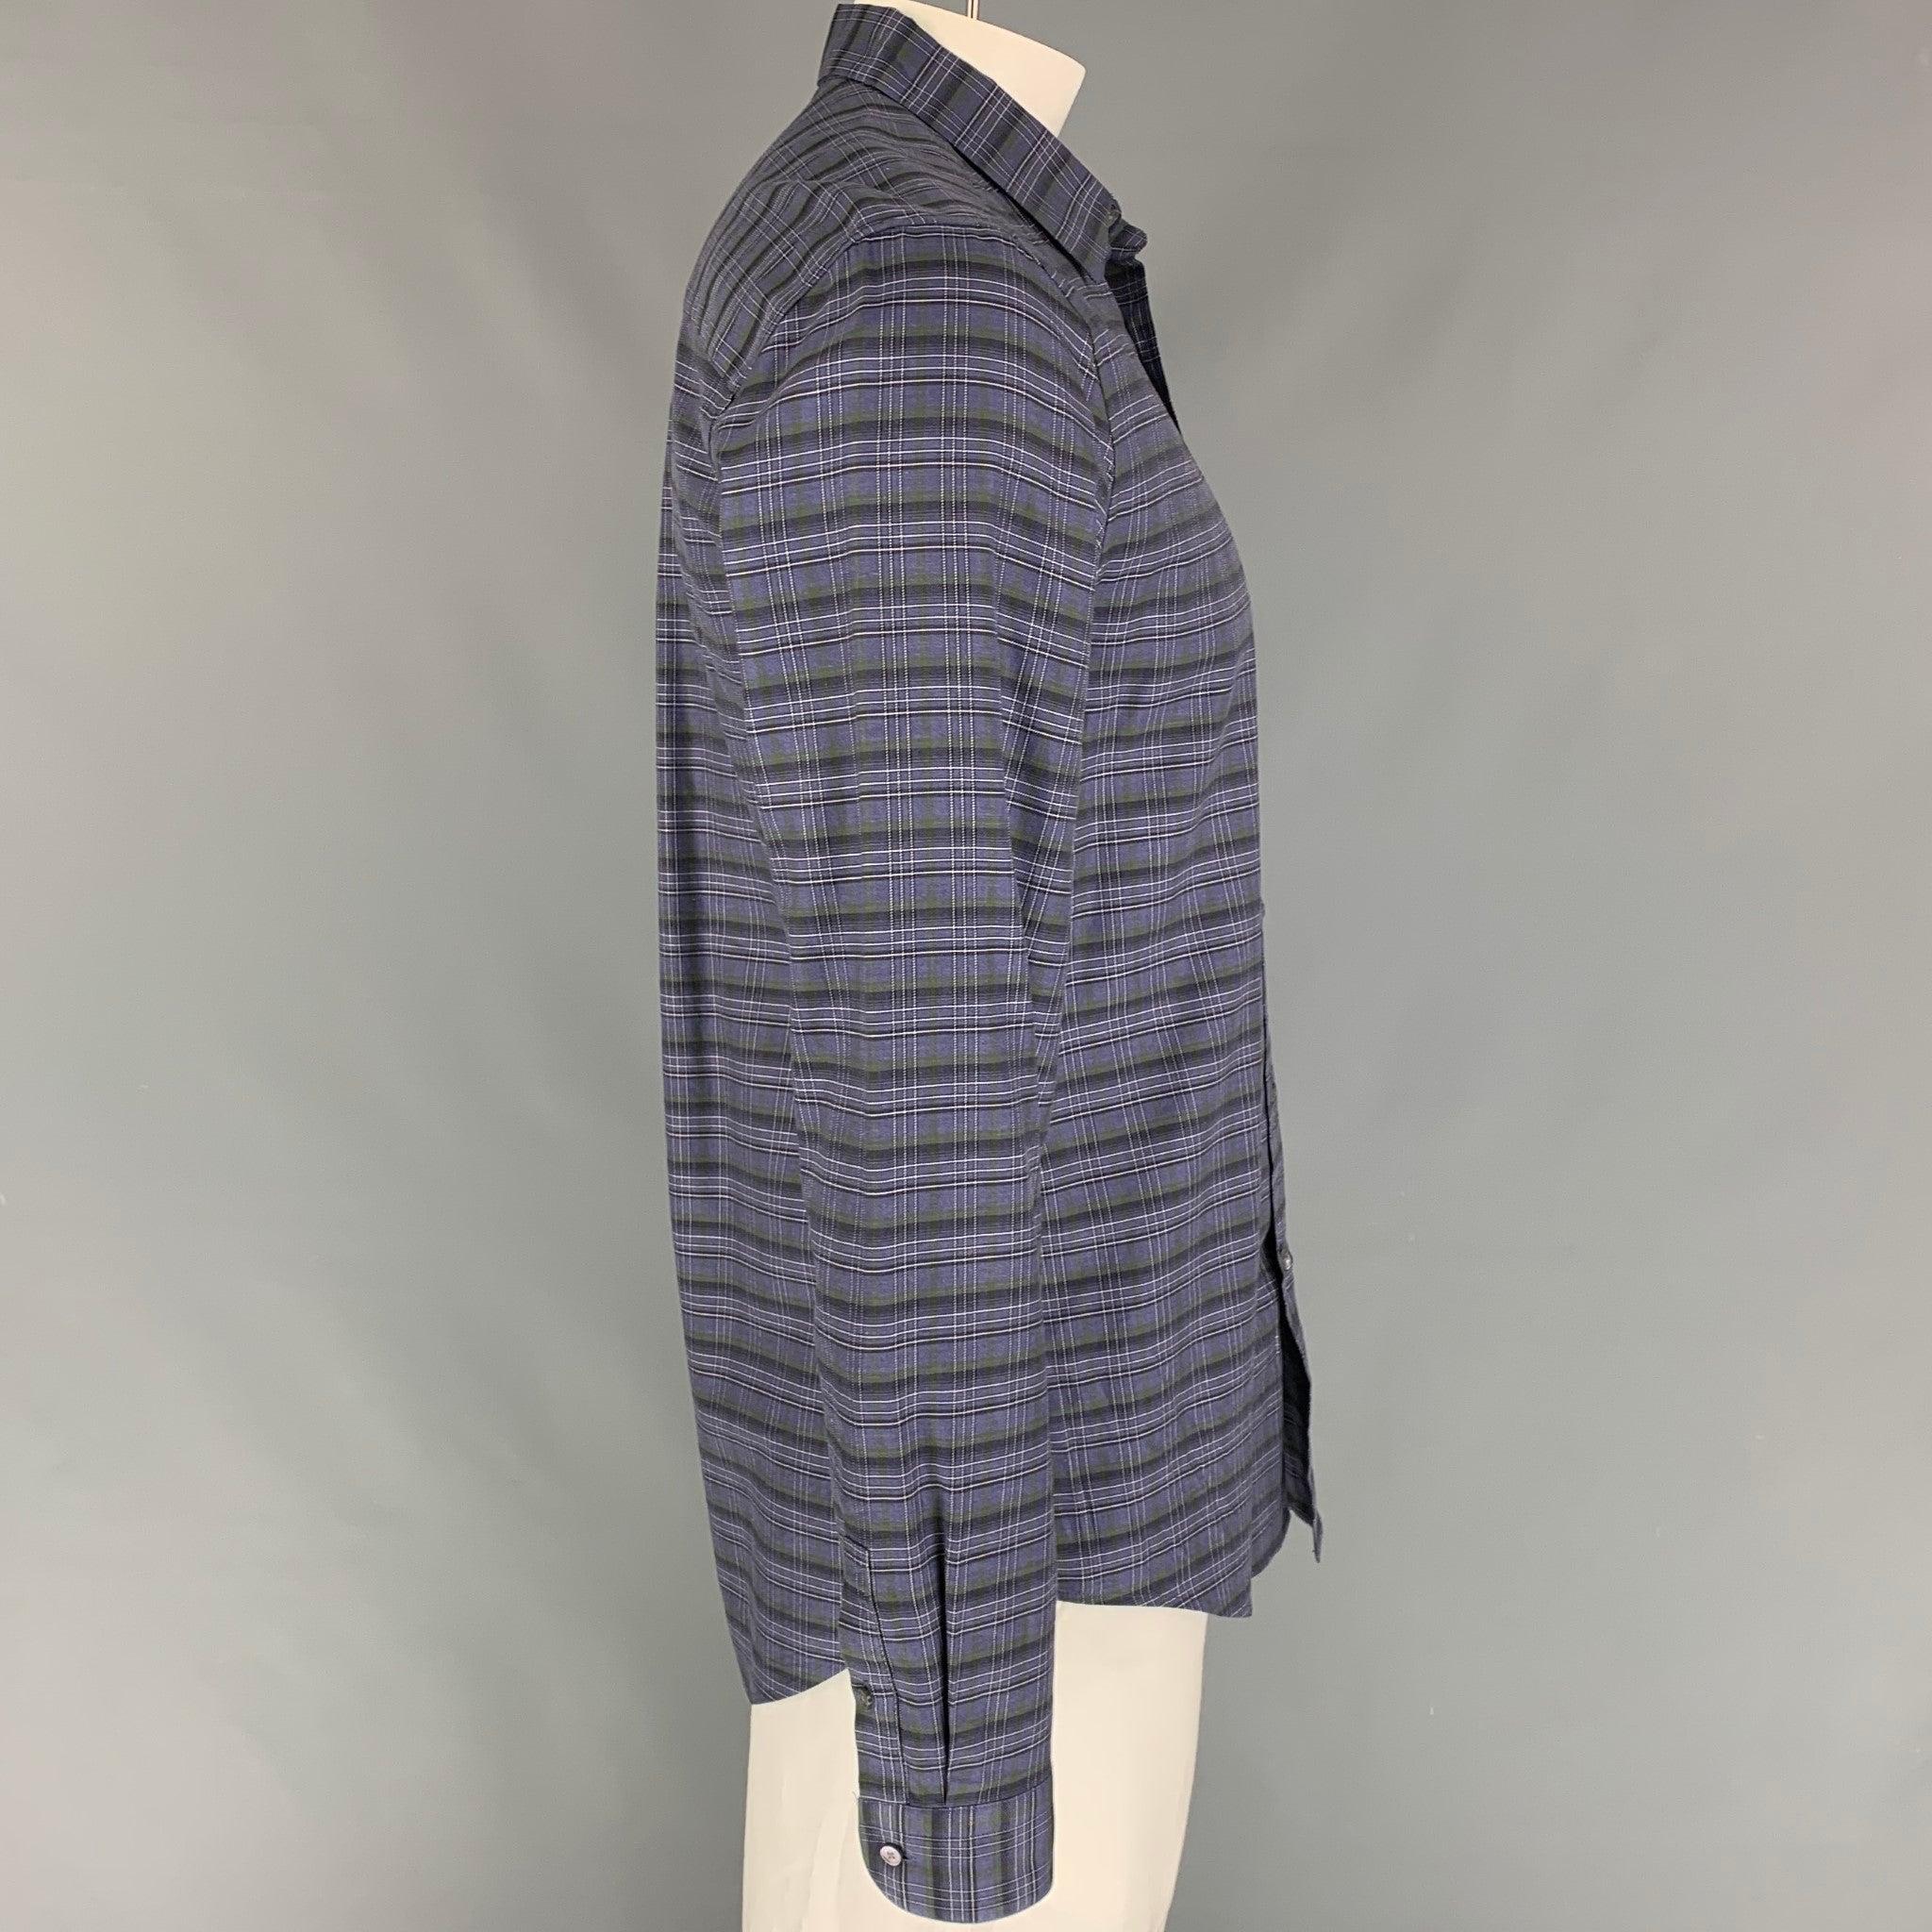 LOUIS VUITTON long sleeve shirt comes in a purple & black plaid cotton featuring a spread collar and a button up closure. Made in Italy.
Excellent
Pre-Owned Condition. 

Marked:   XL  

Measurements: 
 
Shoulder: 19 inches  Chest: 42 inches  Sleeve: